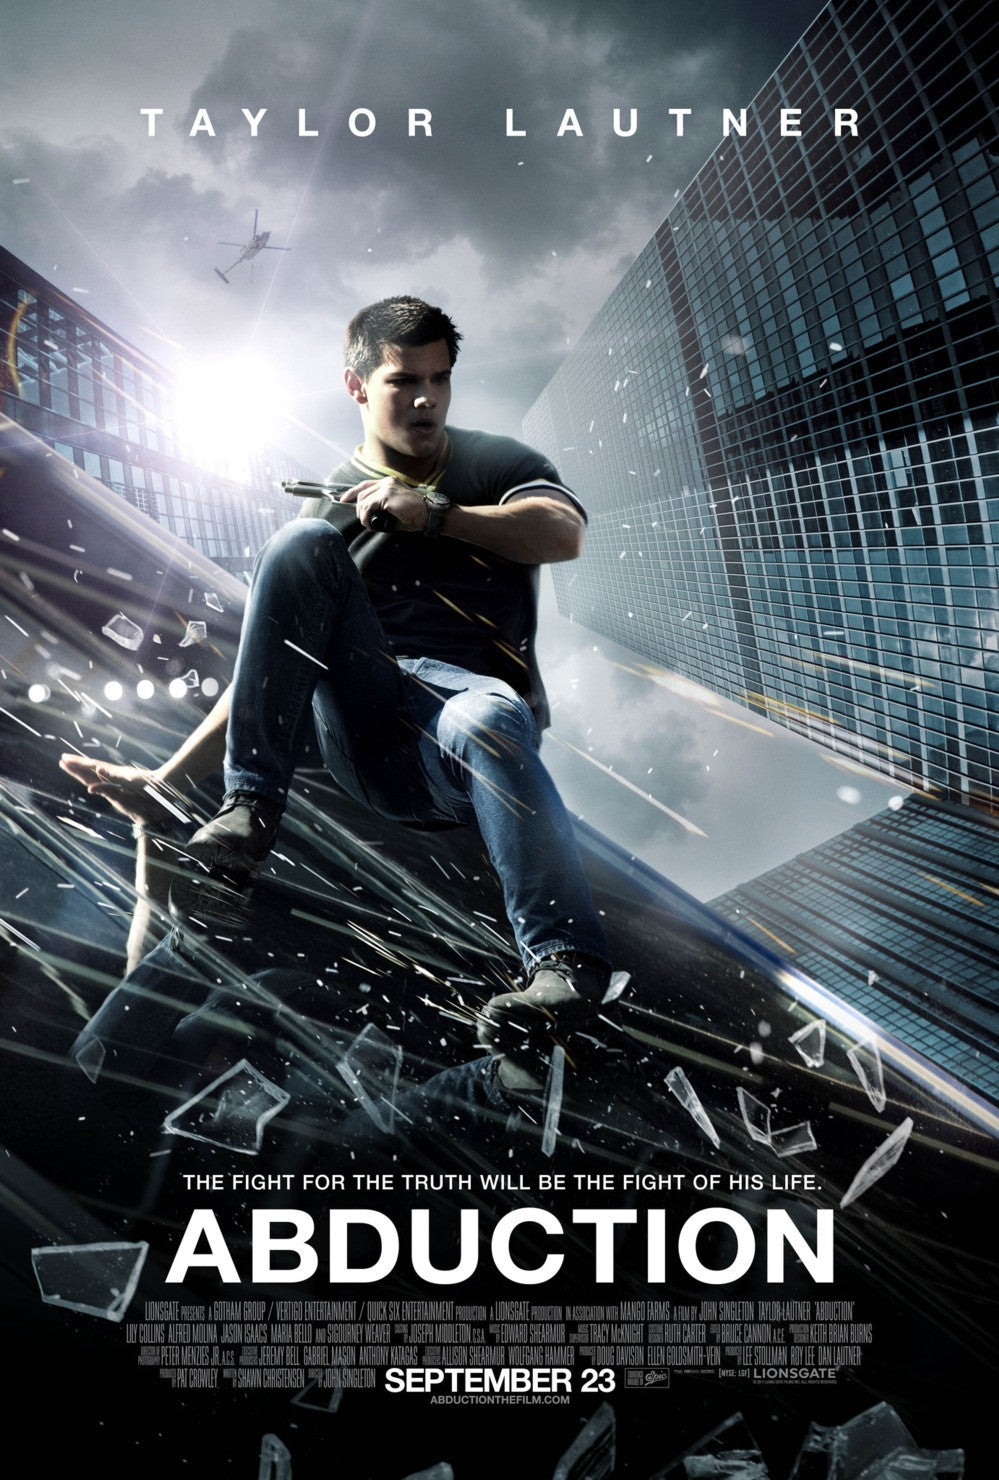 Abduction full size 27x40 inch 2011 movie poster (Taylor Lautner)